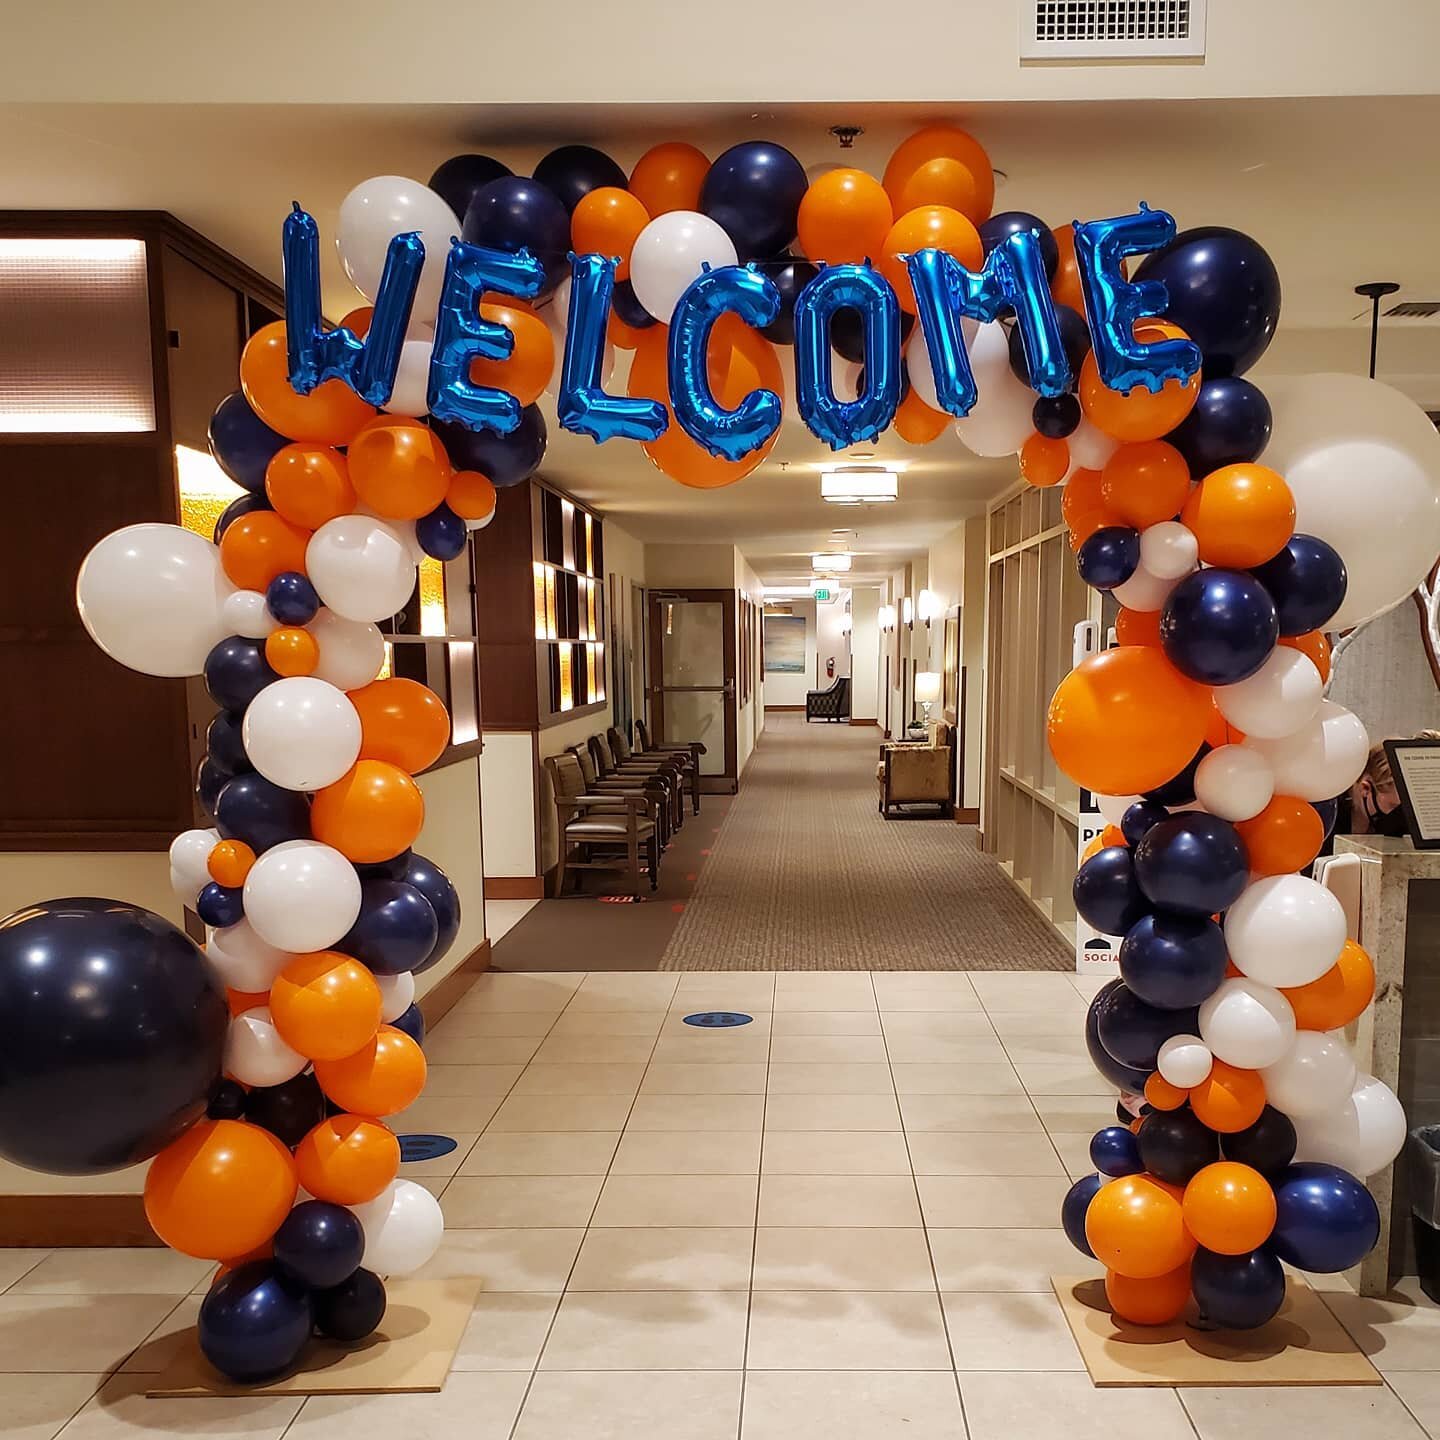 The Ackerly welcomes the first round of COVID-19 vaccinations for their residents and staff. 

Better days are coming. Stay safe out there! 

#balloons #balloonsonbroadway #balloonsportland #balloonspdx #pdxballoons #portlandballoons #balloondecor #d